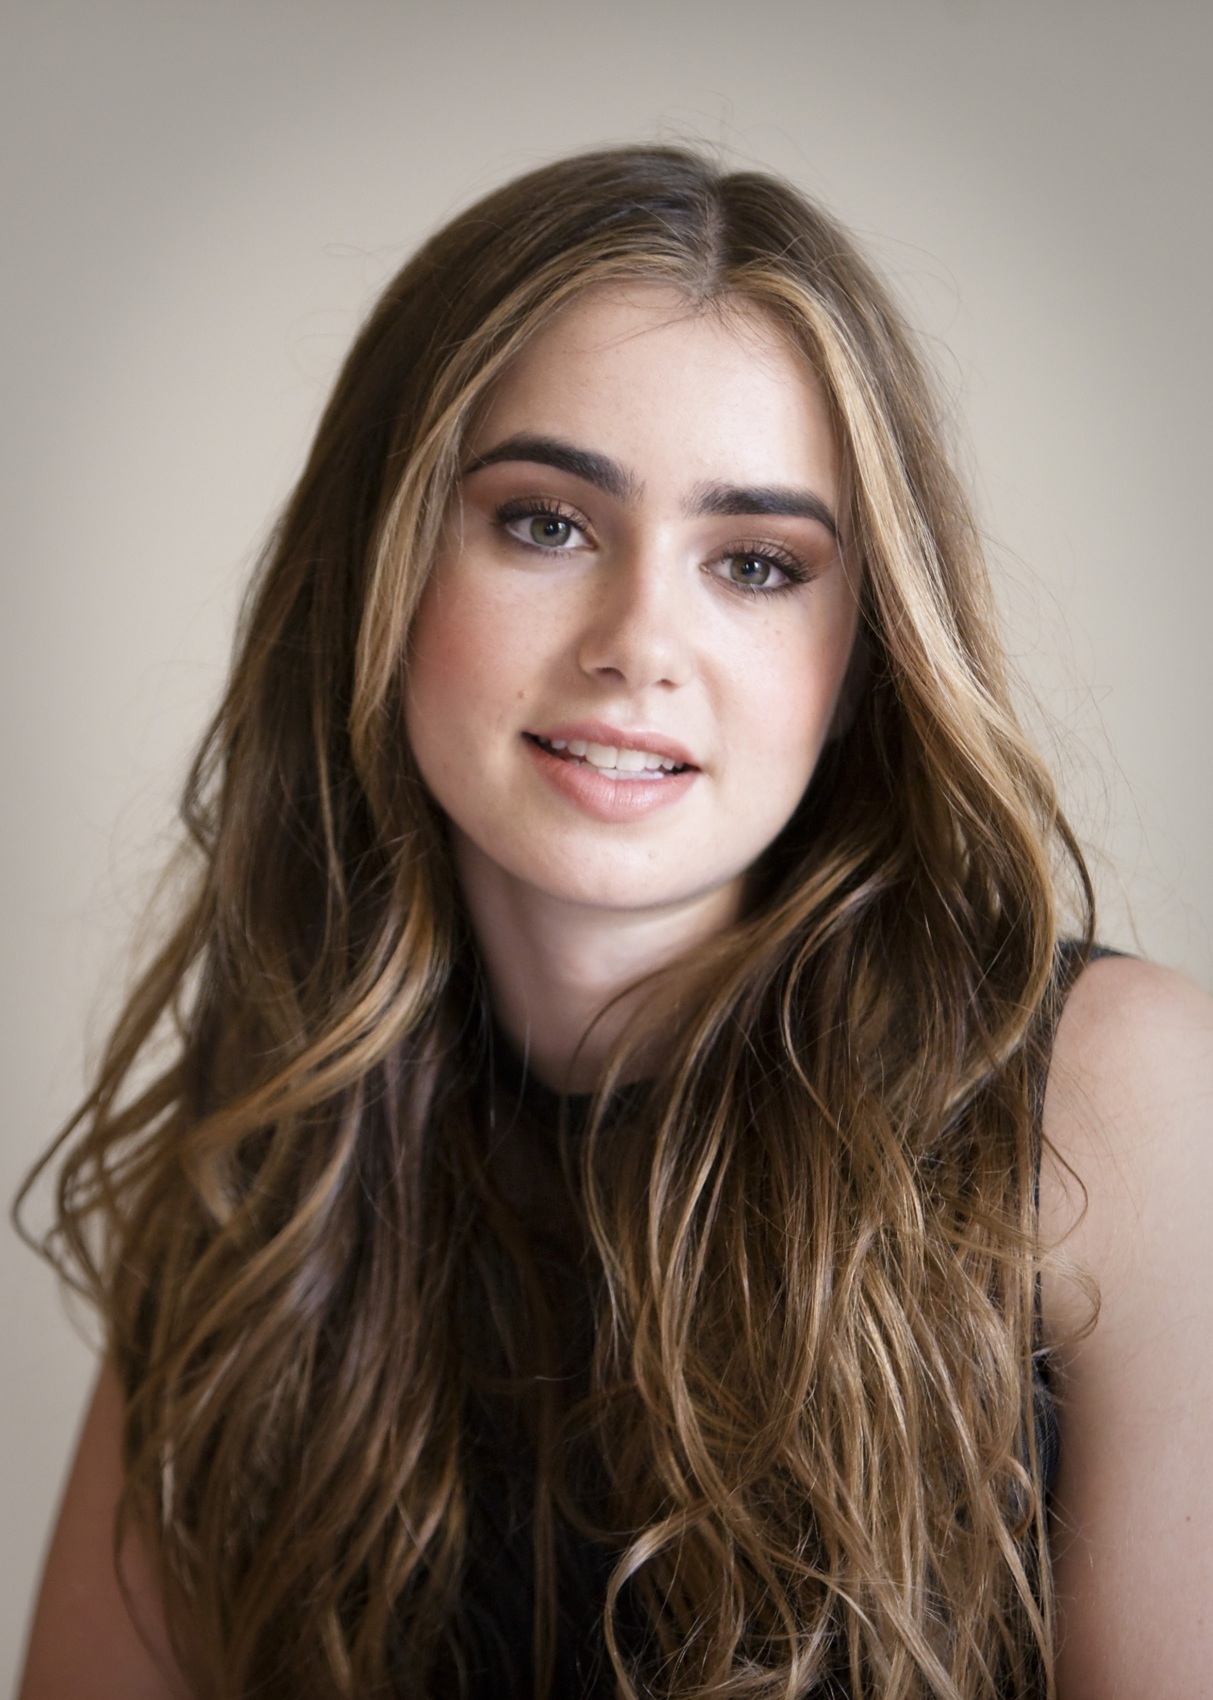 Hot Lily Collins Photoshoot Wallpapers